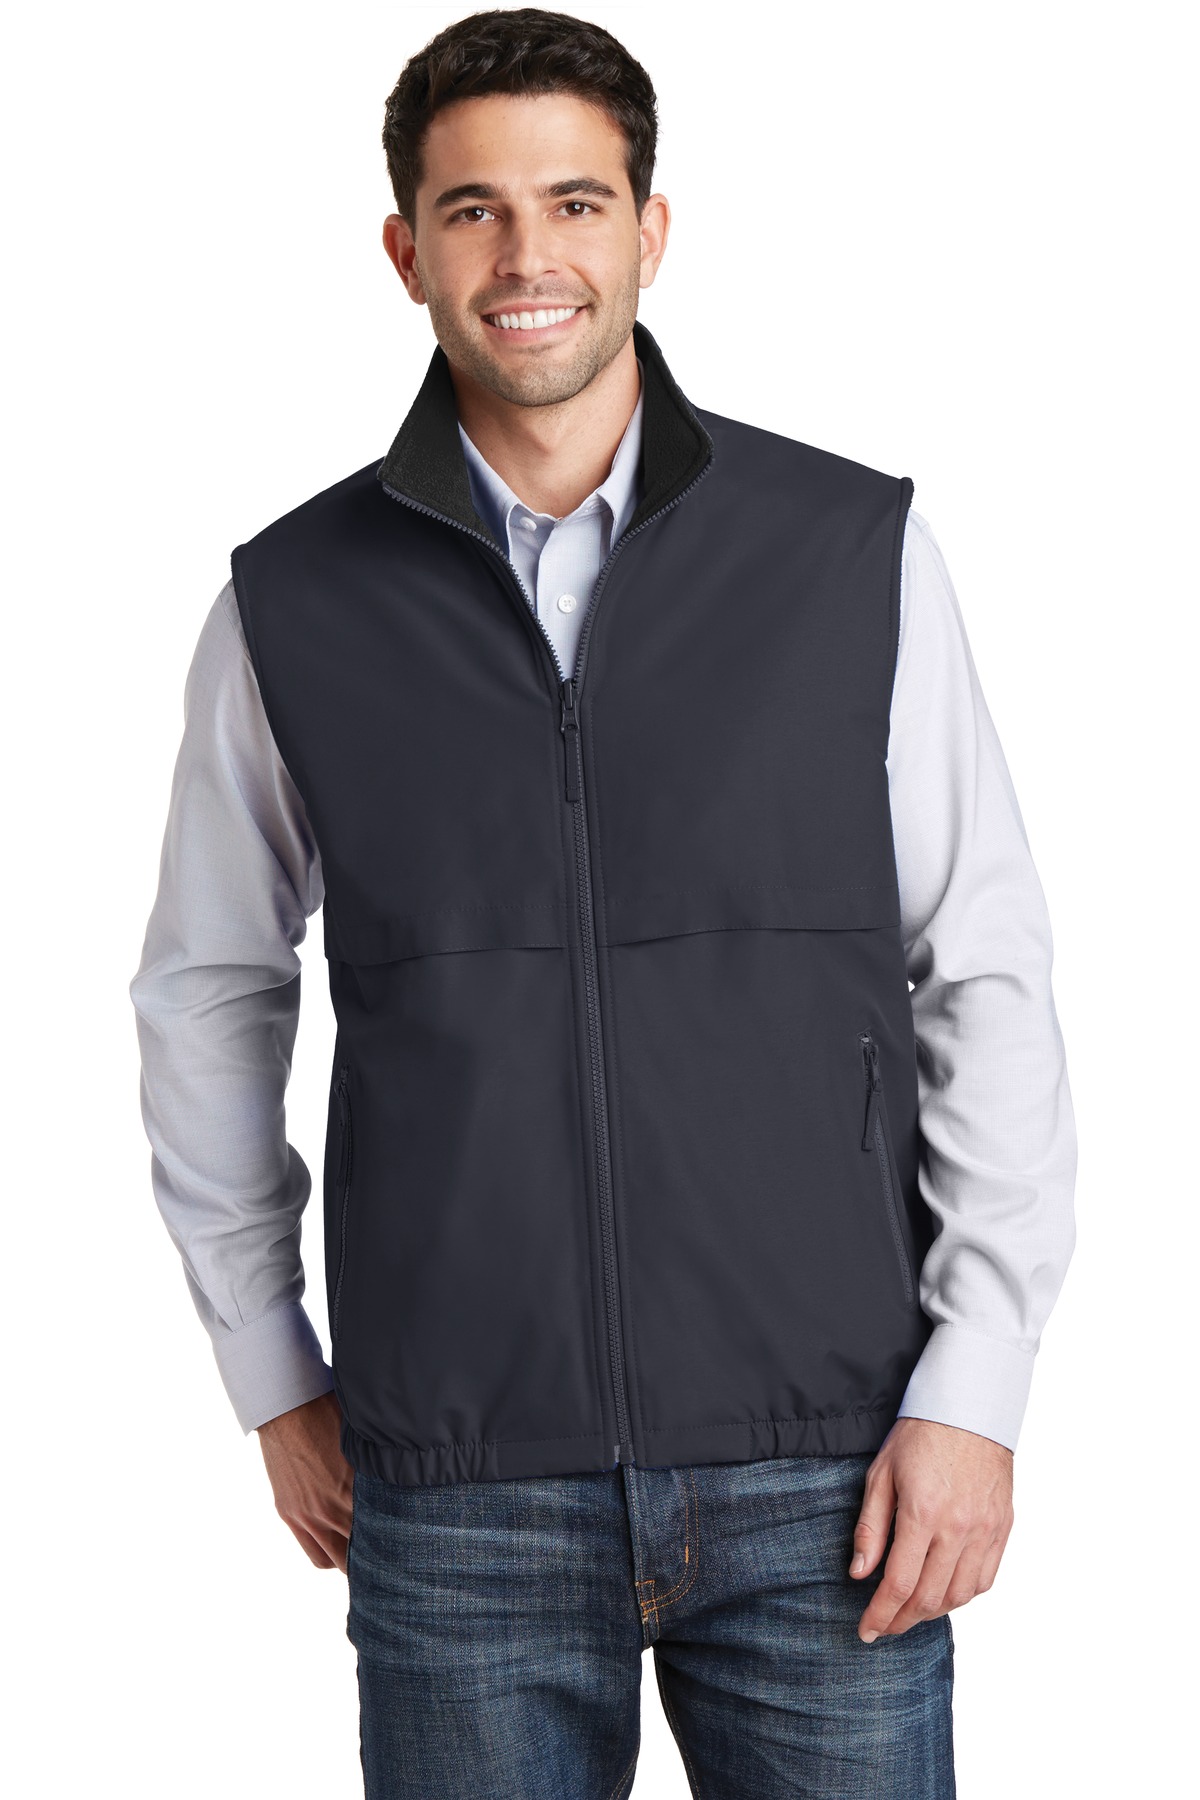 Port Authority Industrial Outerwear ® Reversible Charger Vest.-Port Authority